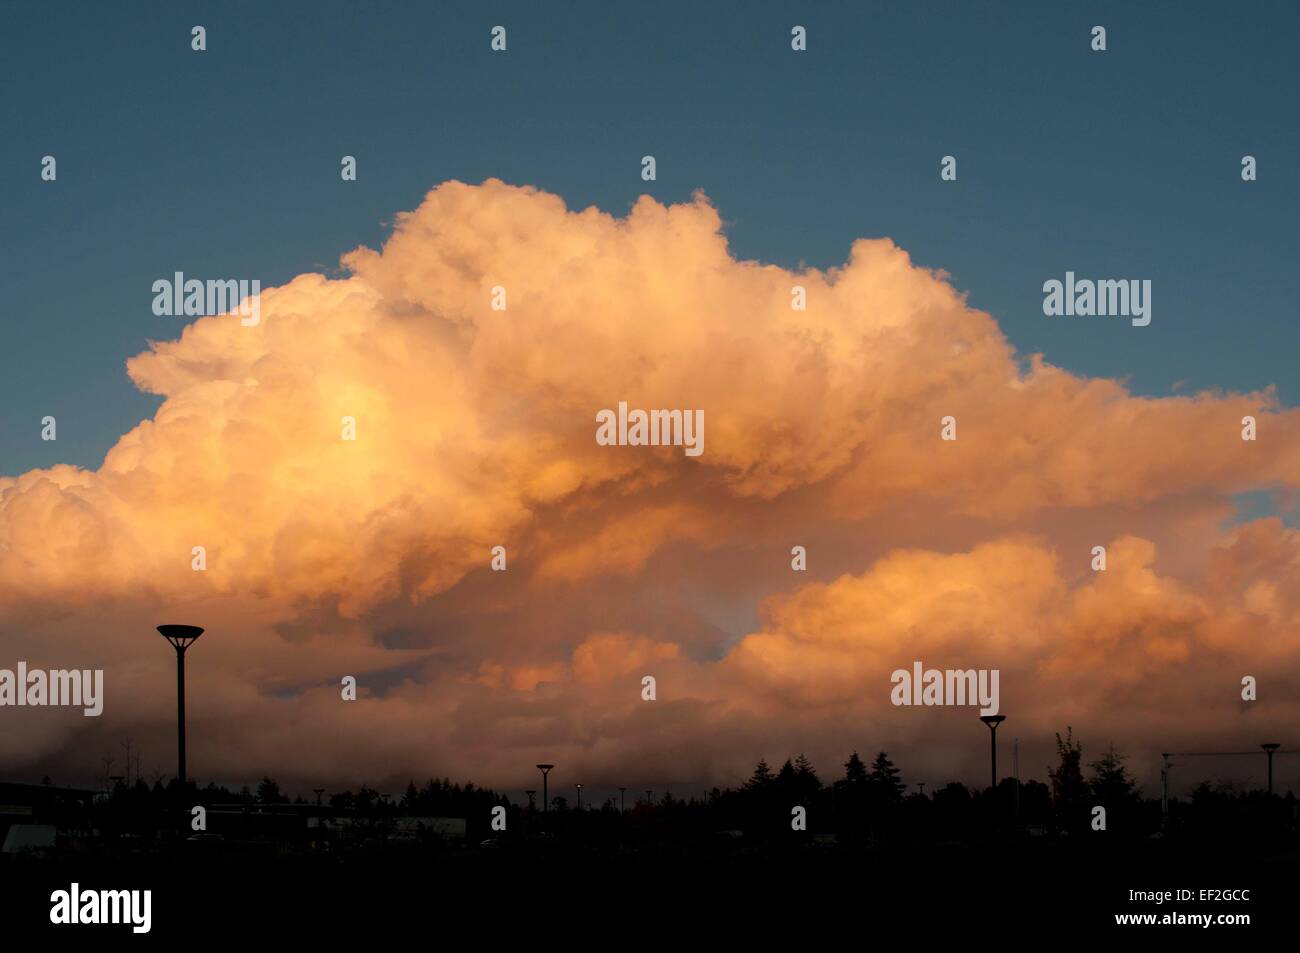 Storm clouds contrasted with blue sky on a November evening in Western Washington State. Stock Photo